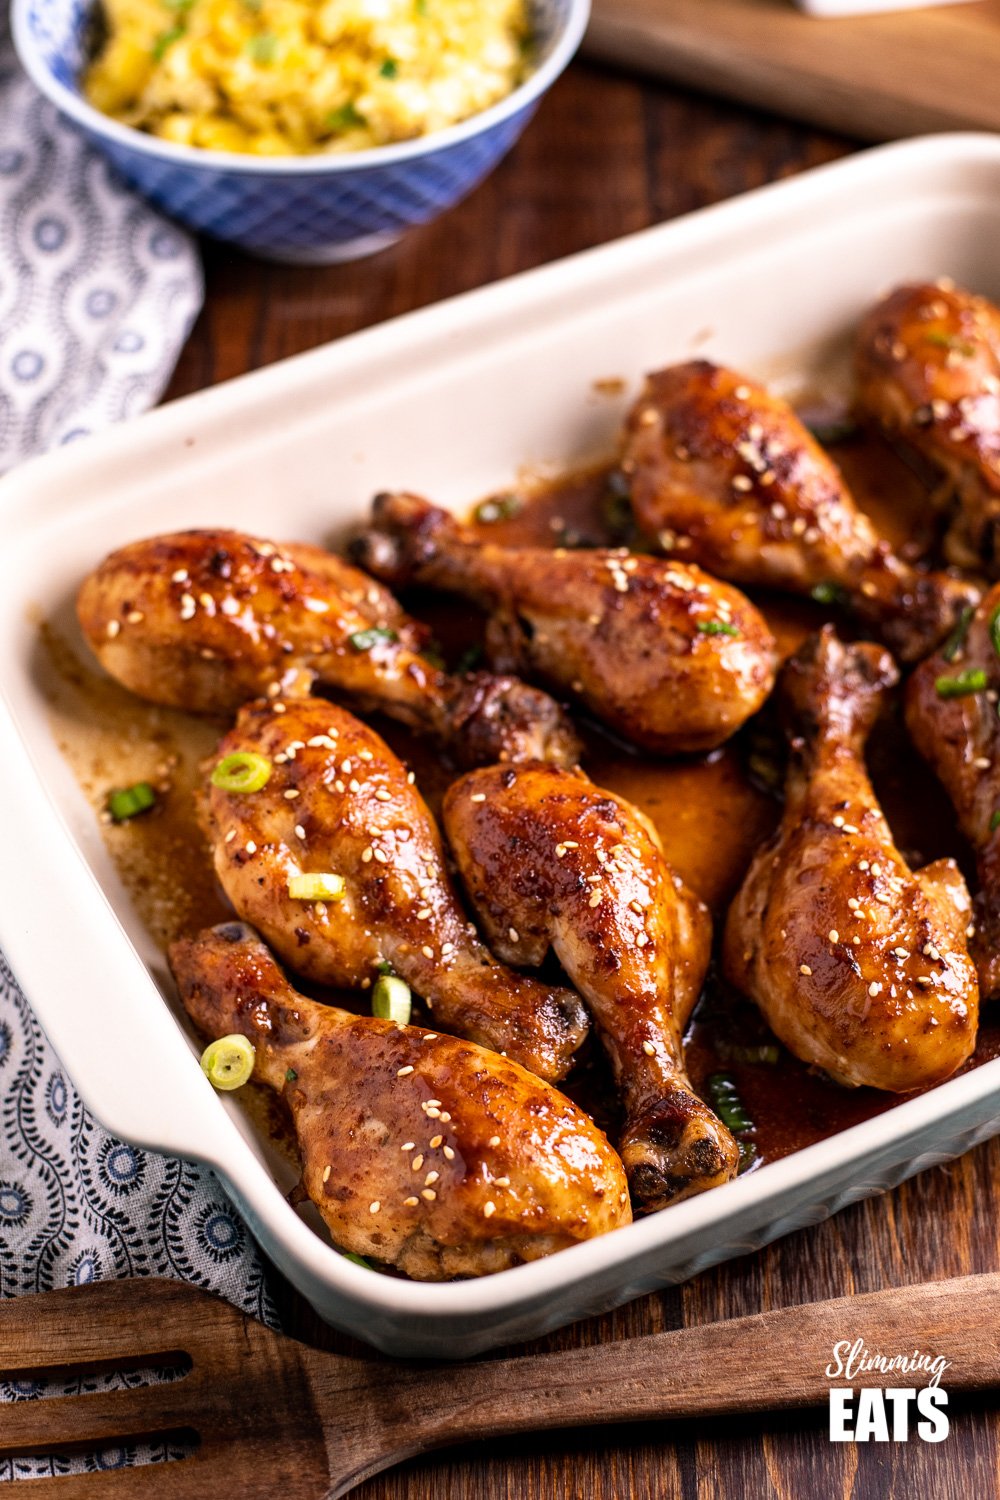 Chinese five spice chicken drumsticks in an oven proof dish on wooden board